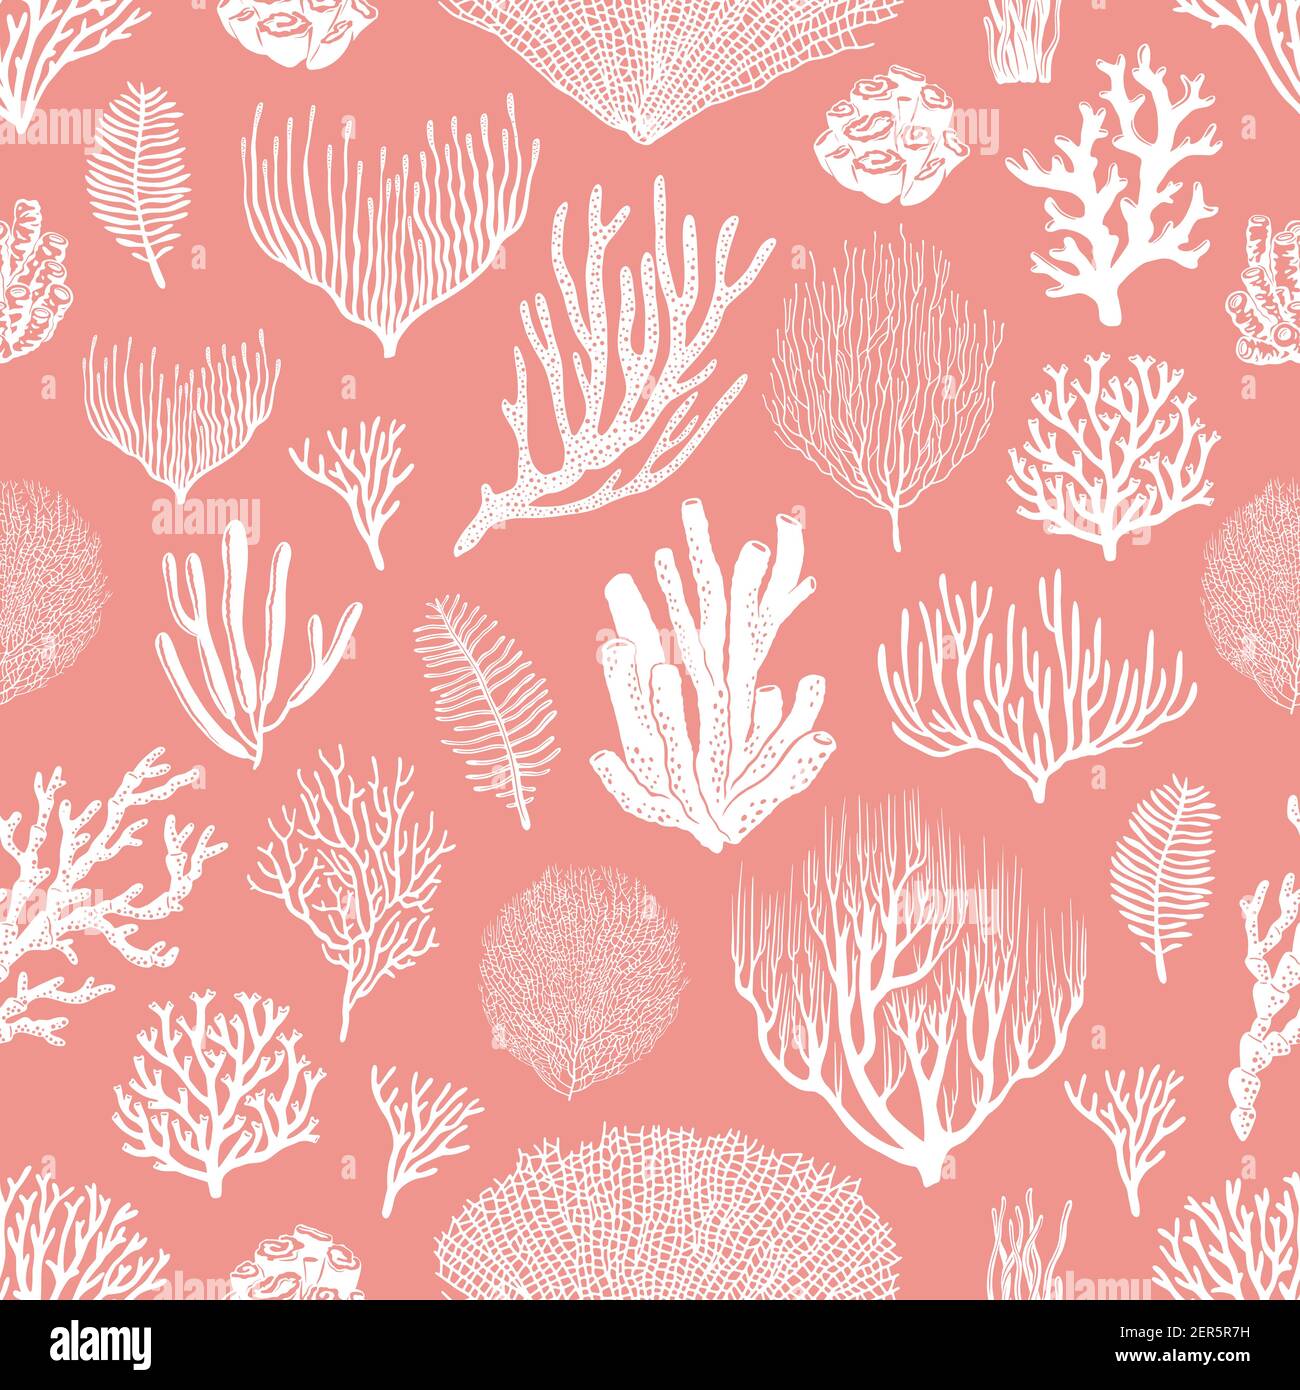 Corals and algae vector seamless pattern on pink background. Sea coral reef polyps and seaweeds, tropical ocean underwater wildlife and marine flora b Stock Vector